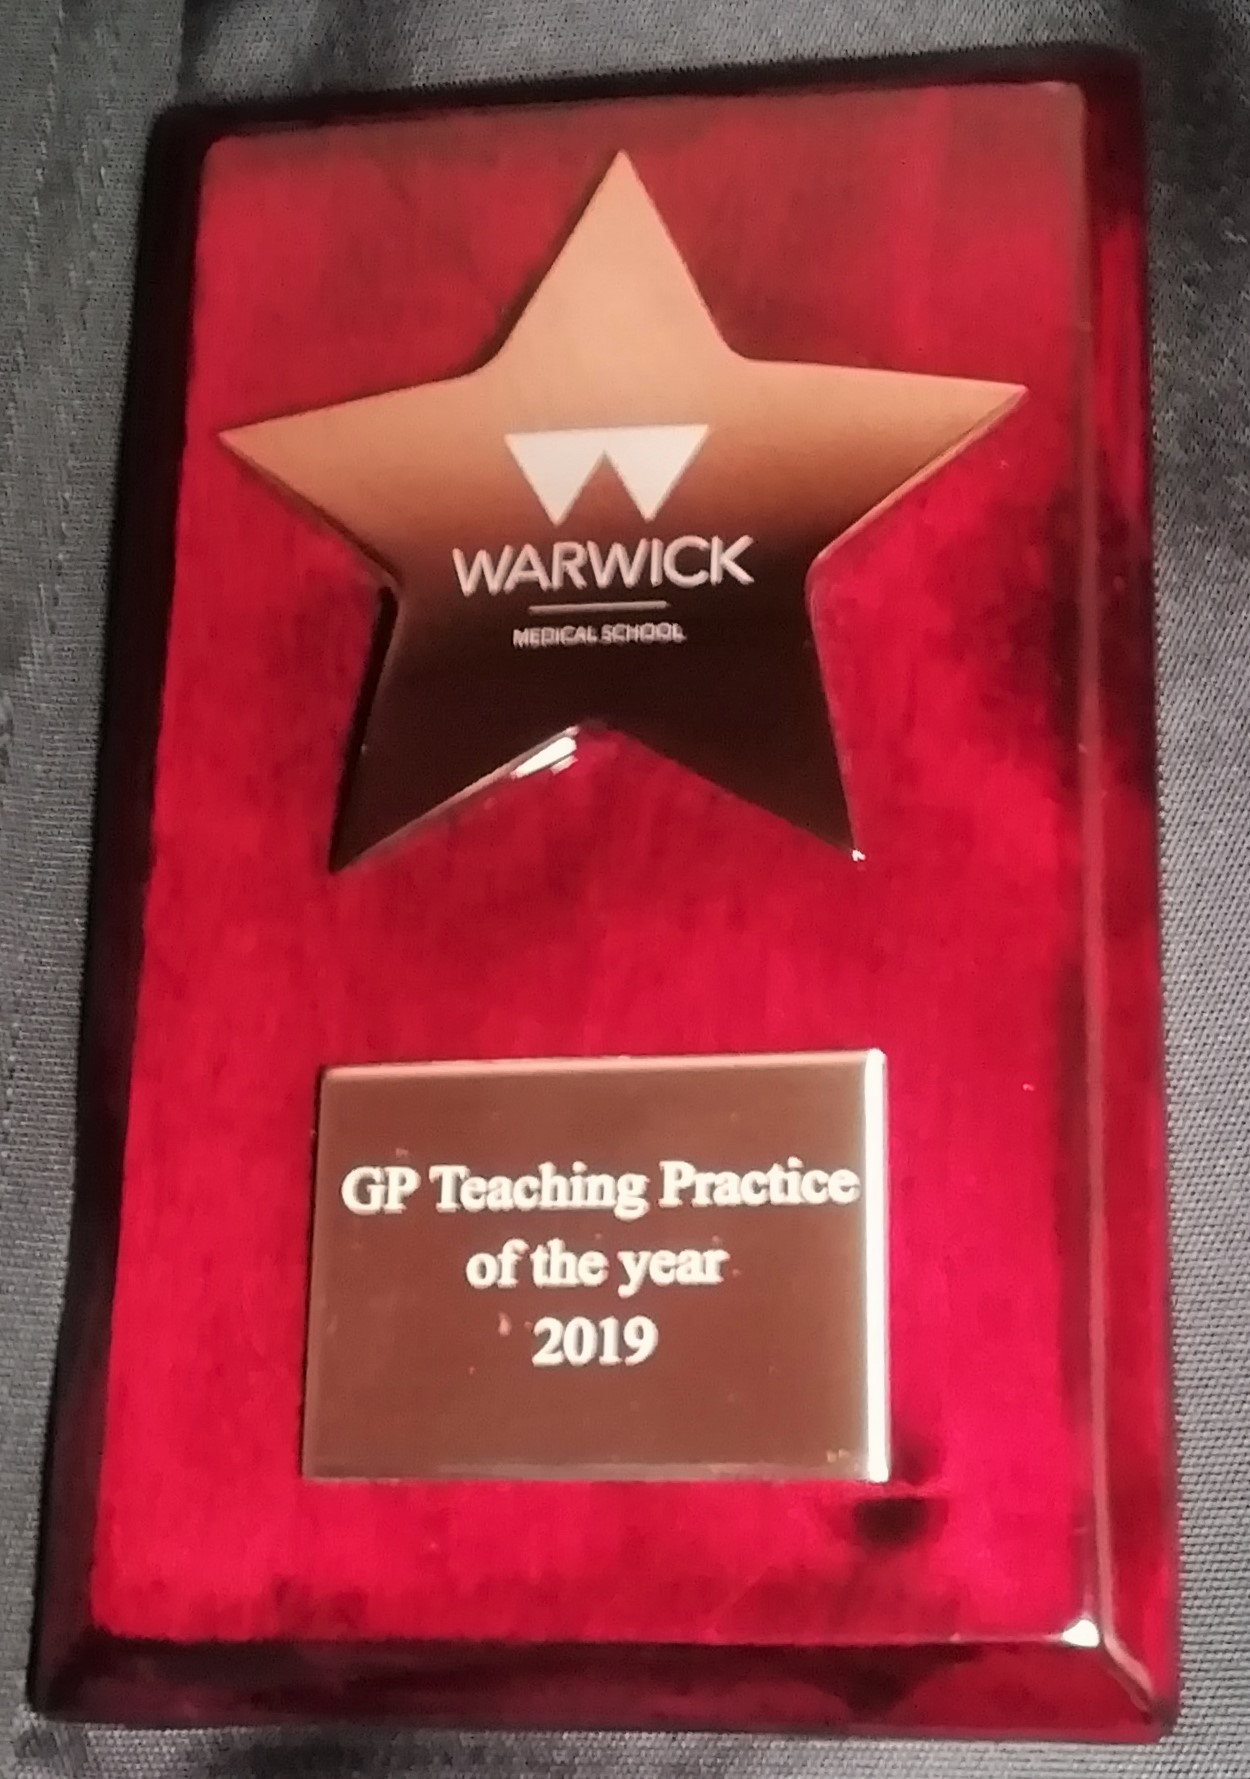 GP Teaching Practice of the year 2019